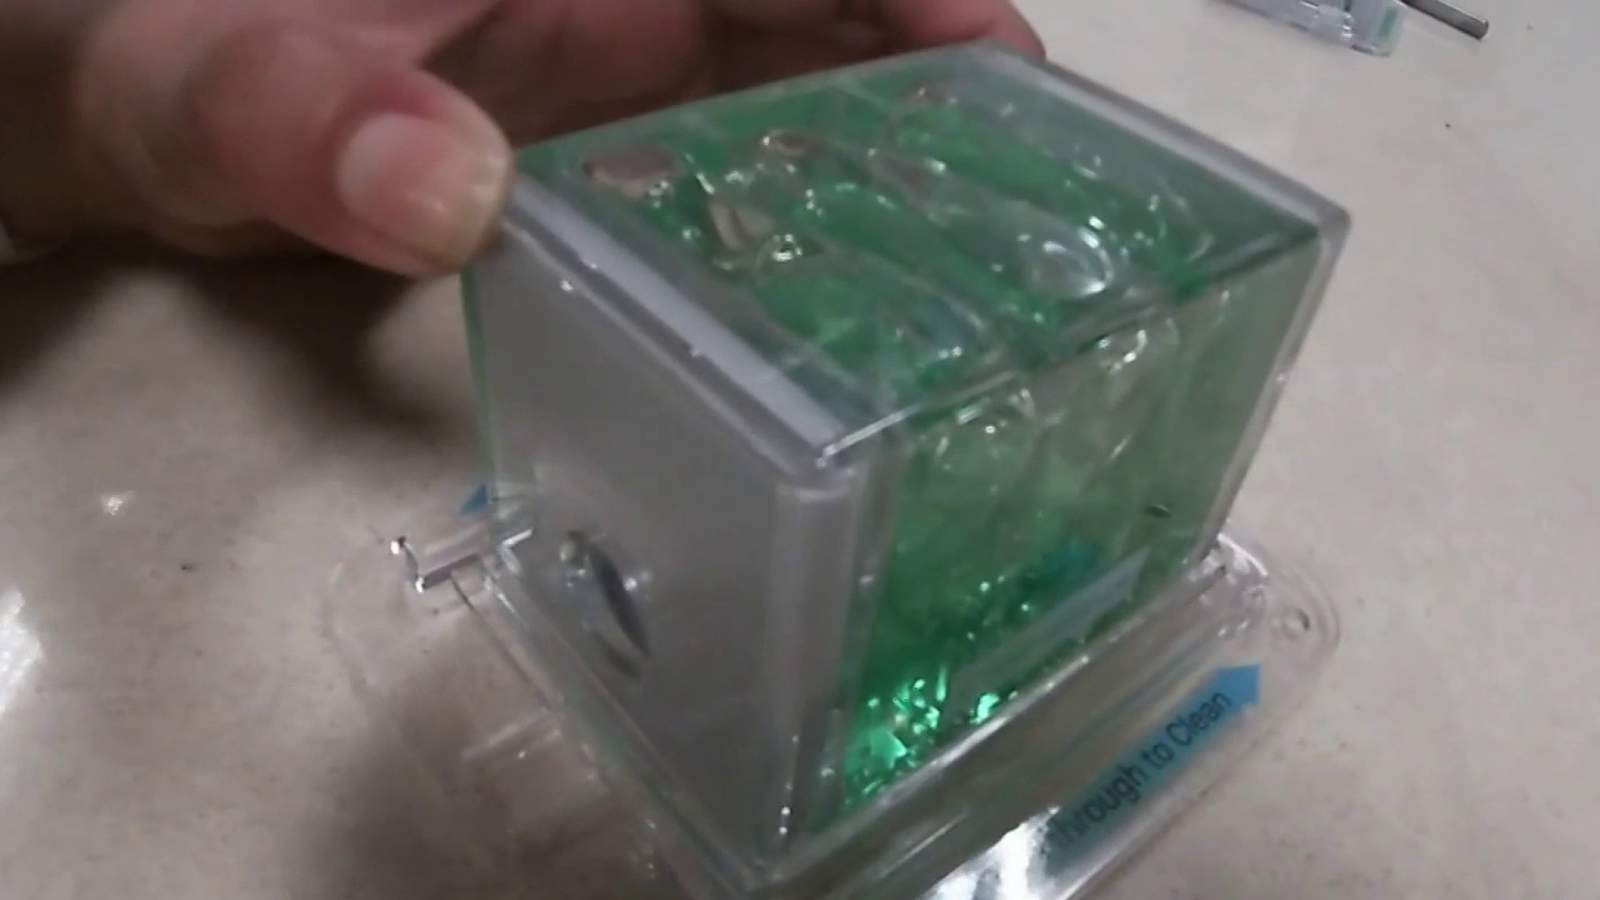 Orlando man invents device to fight germs from his garage